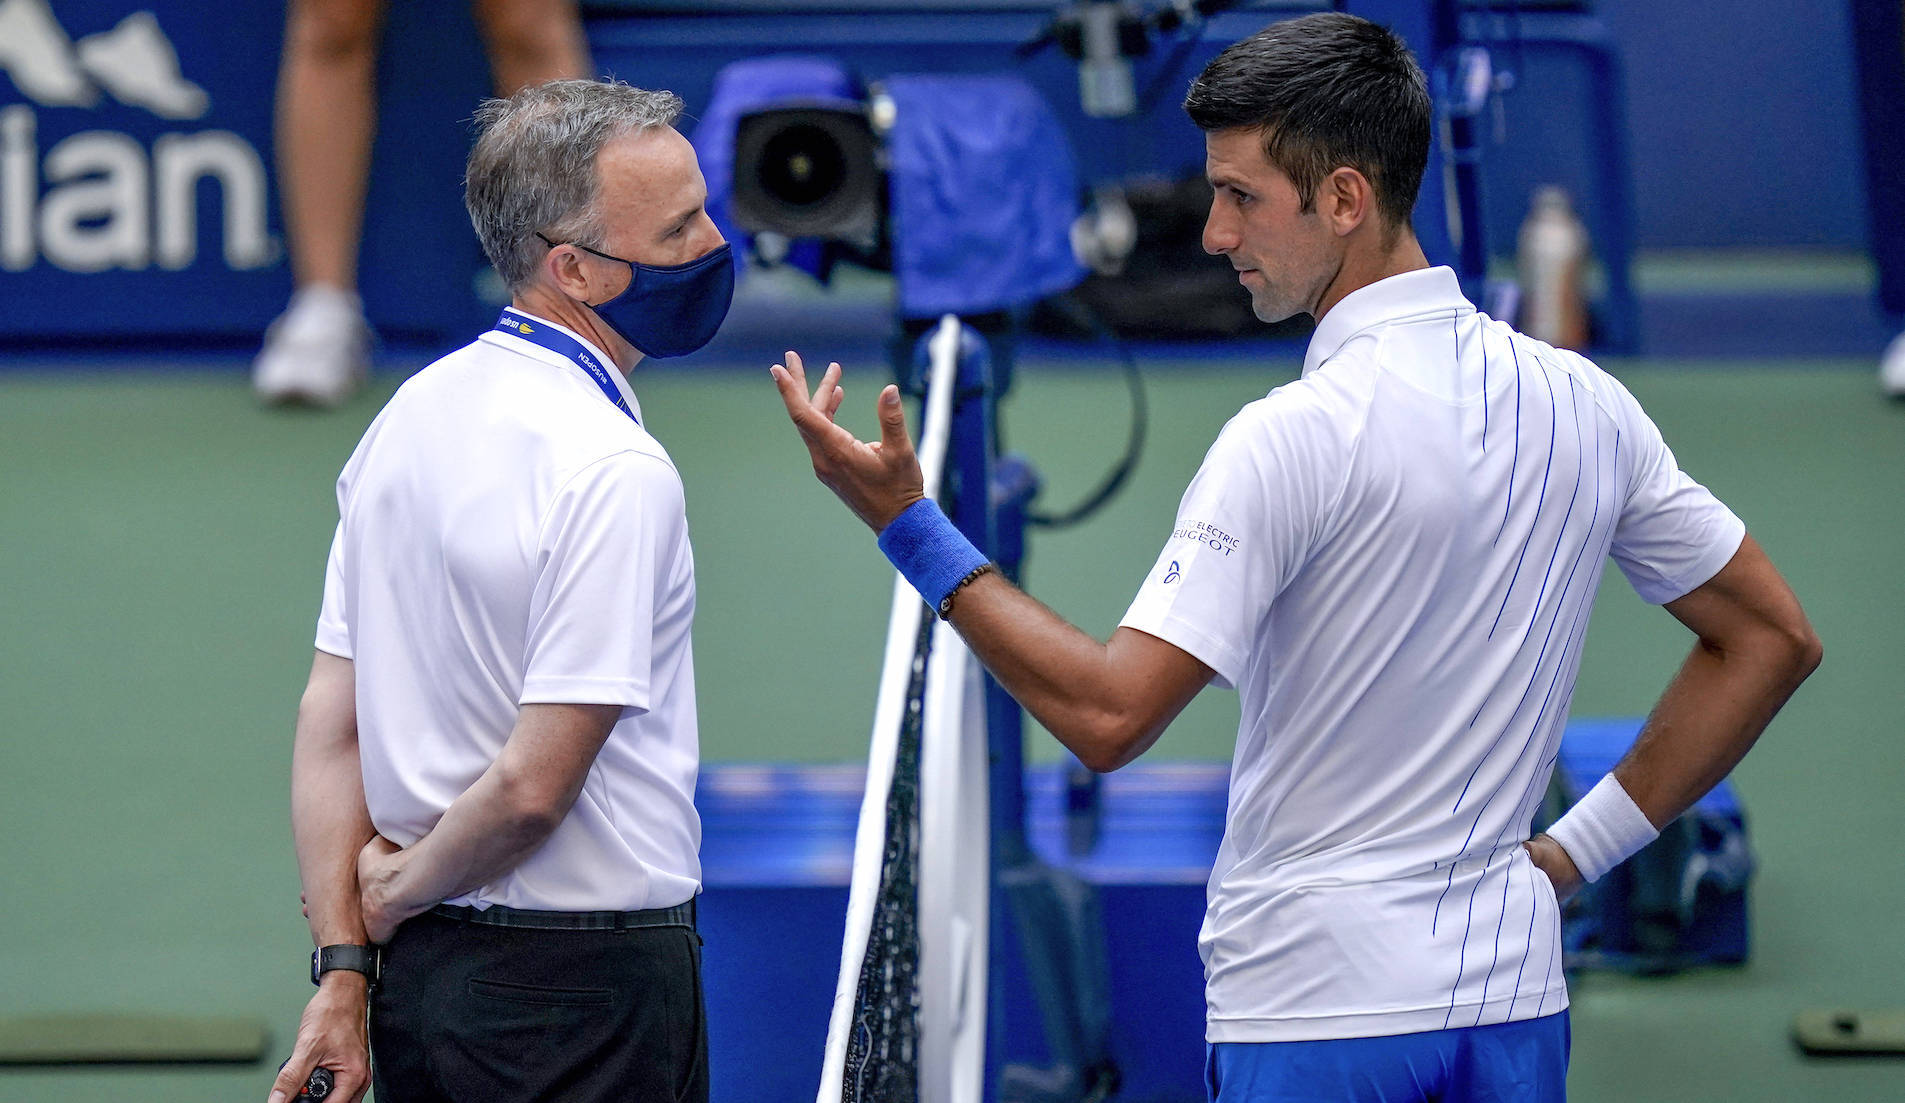 Novak Djokovic, of Serbia, talks with the umpire after inadvertently hitting a line judge with a ball after hitting it in reaction to losing a point against Pablo Carreno Busta, of Spain, during the fourth round of the US Open tennis championships, Sunday, Sept. 6, 2020, in New York. Djokovic defaulted the match. (AP Photo/Seth Wenig)/USO169/20250742484133//2009062231